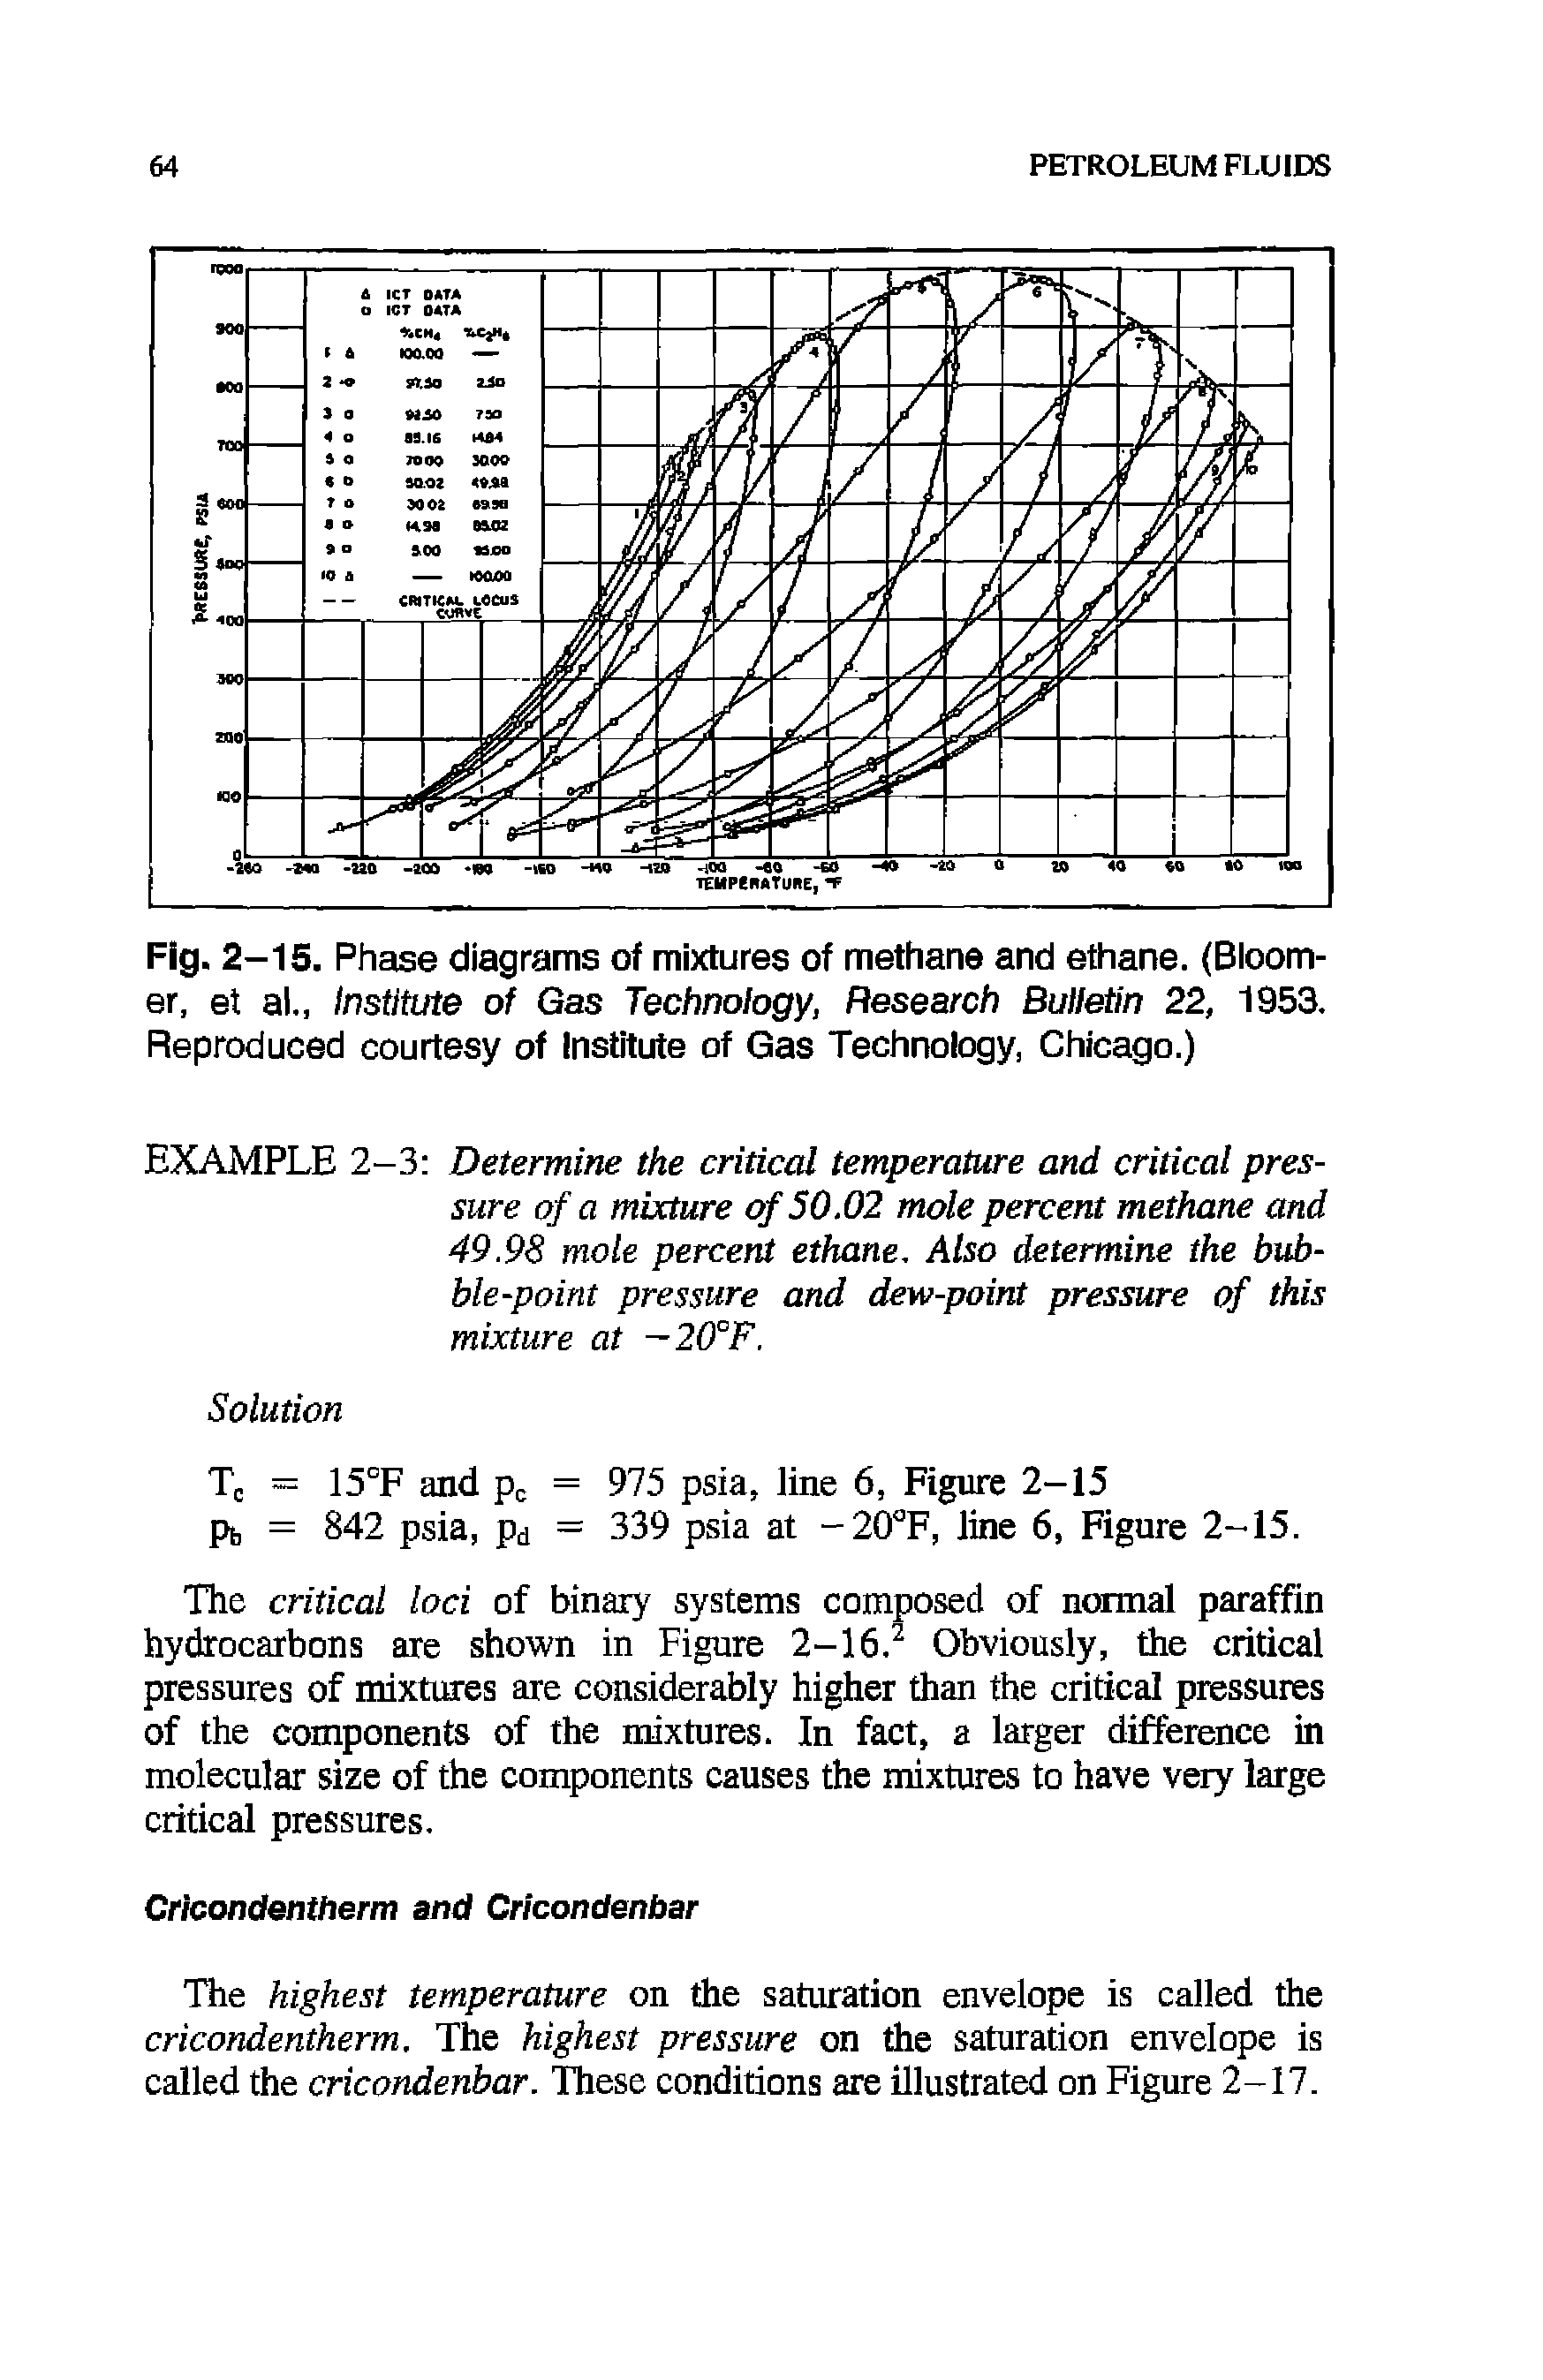 Fig. 2-15. Phase diagrams of mixtures of methane and ethane. (Bloomer, et al., Institute of Gas Technology, Research Bulletin 22, 1953. Reproduced courtesy of Institute of Gas Technology, Chicago.)...